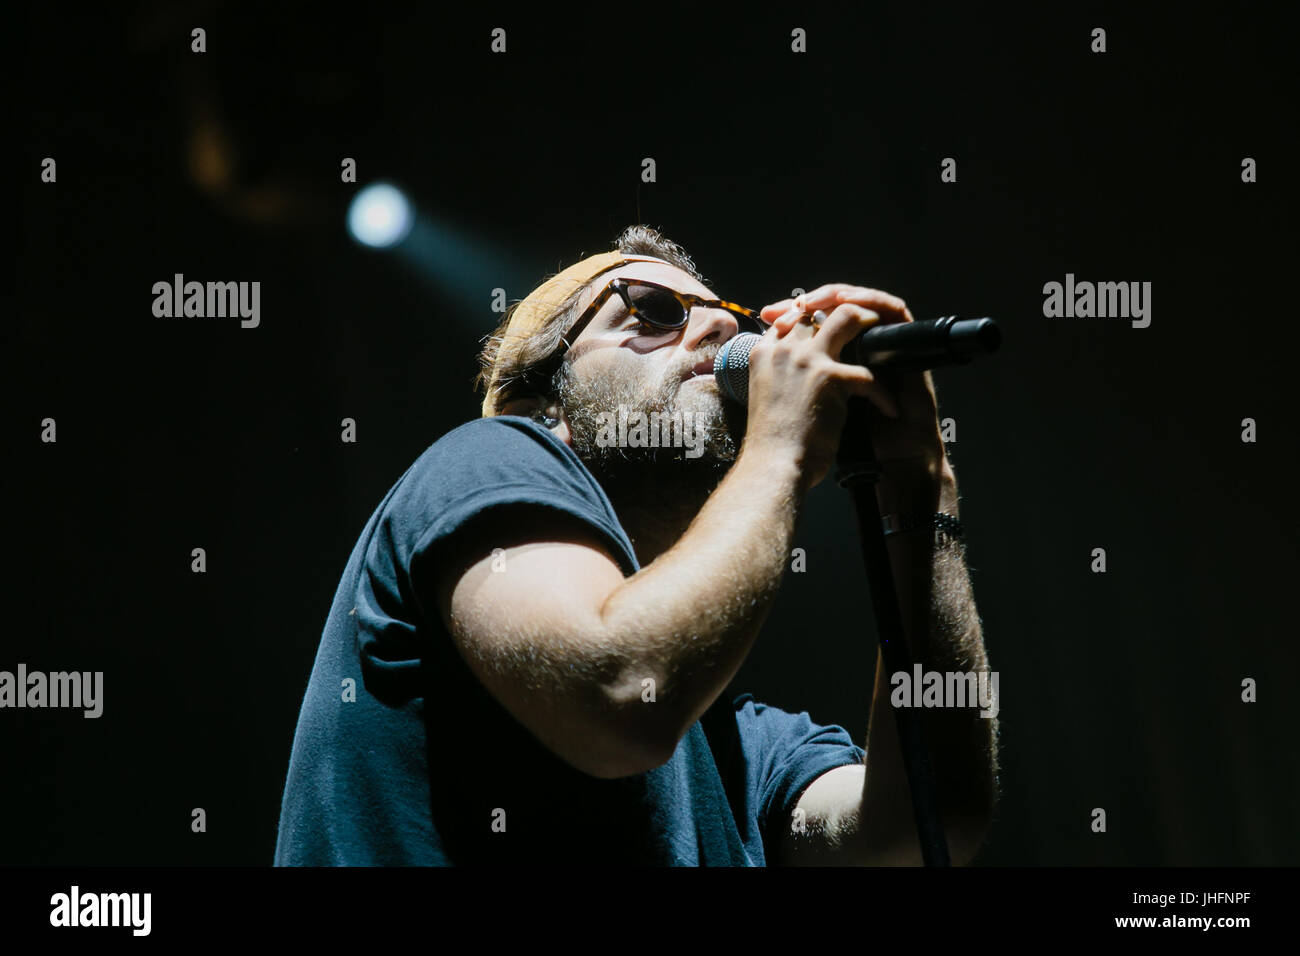 Turin, Italy. 12th July, 2017. The Italian pop band Thegiornalisti performs live in Turin during the Flowers festival. Credit: Daniele Baldi/Pacific Press/Alamy Live News Stock Photo